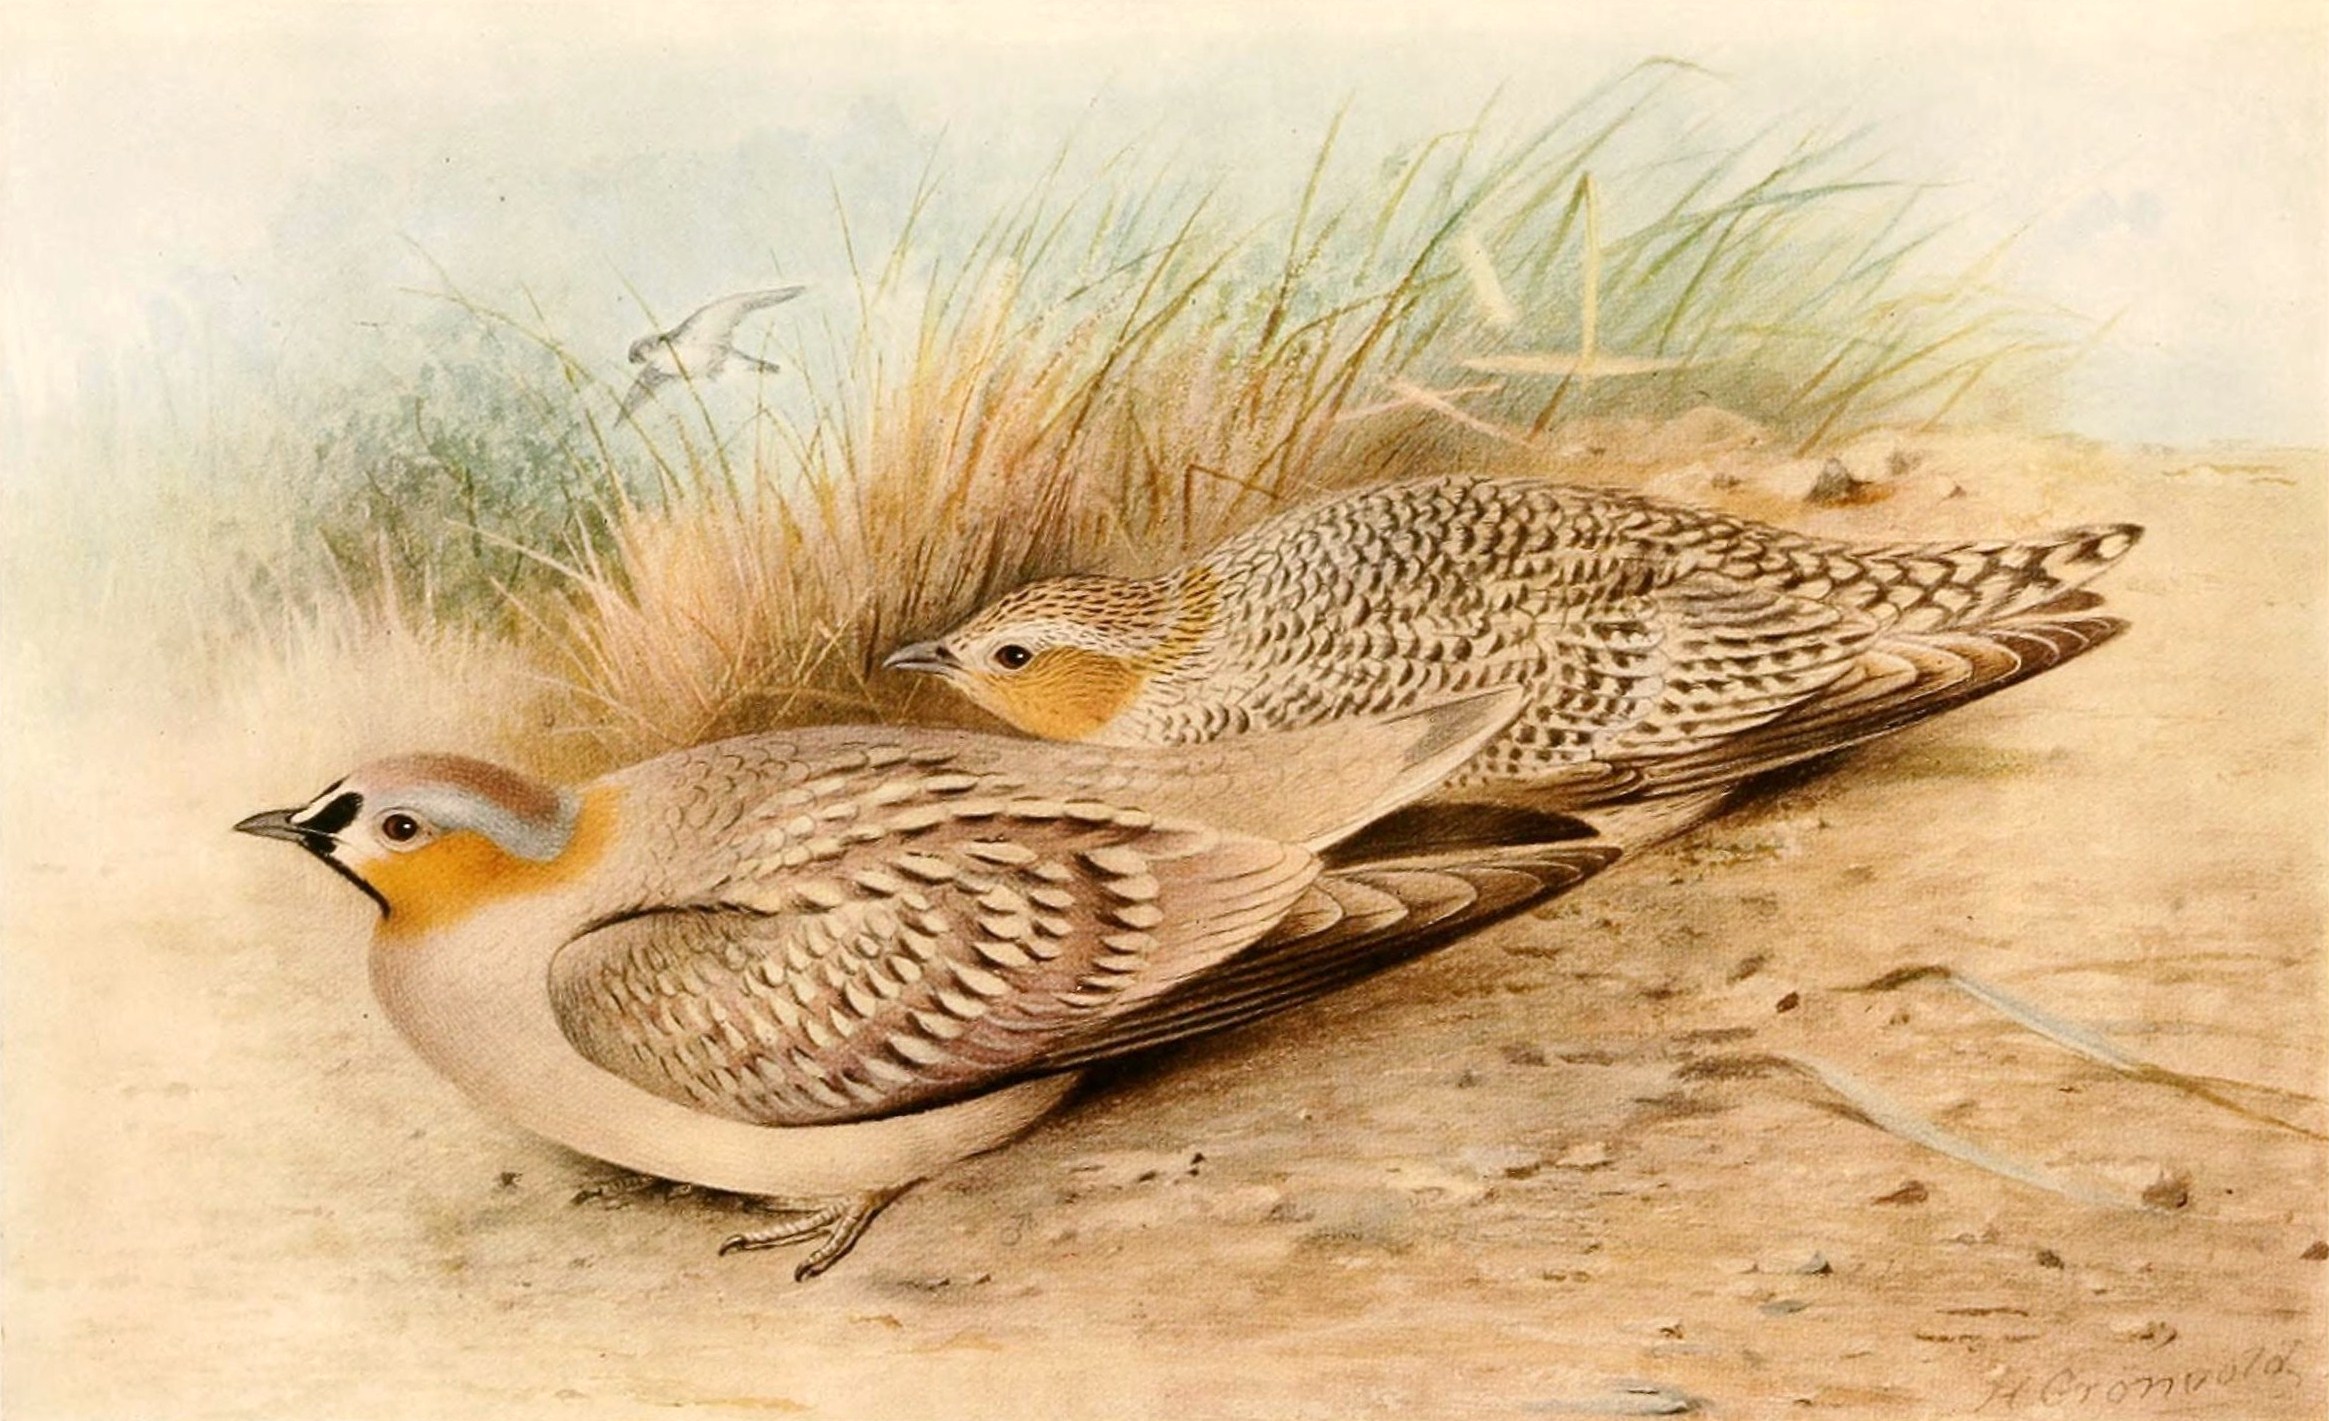 Image of Crowned Sandgrouse